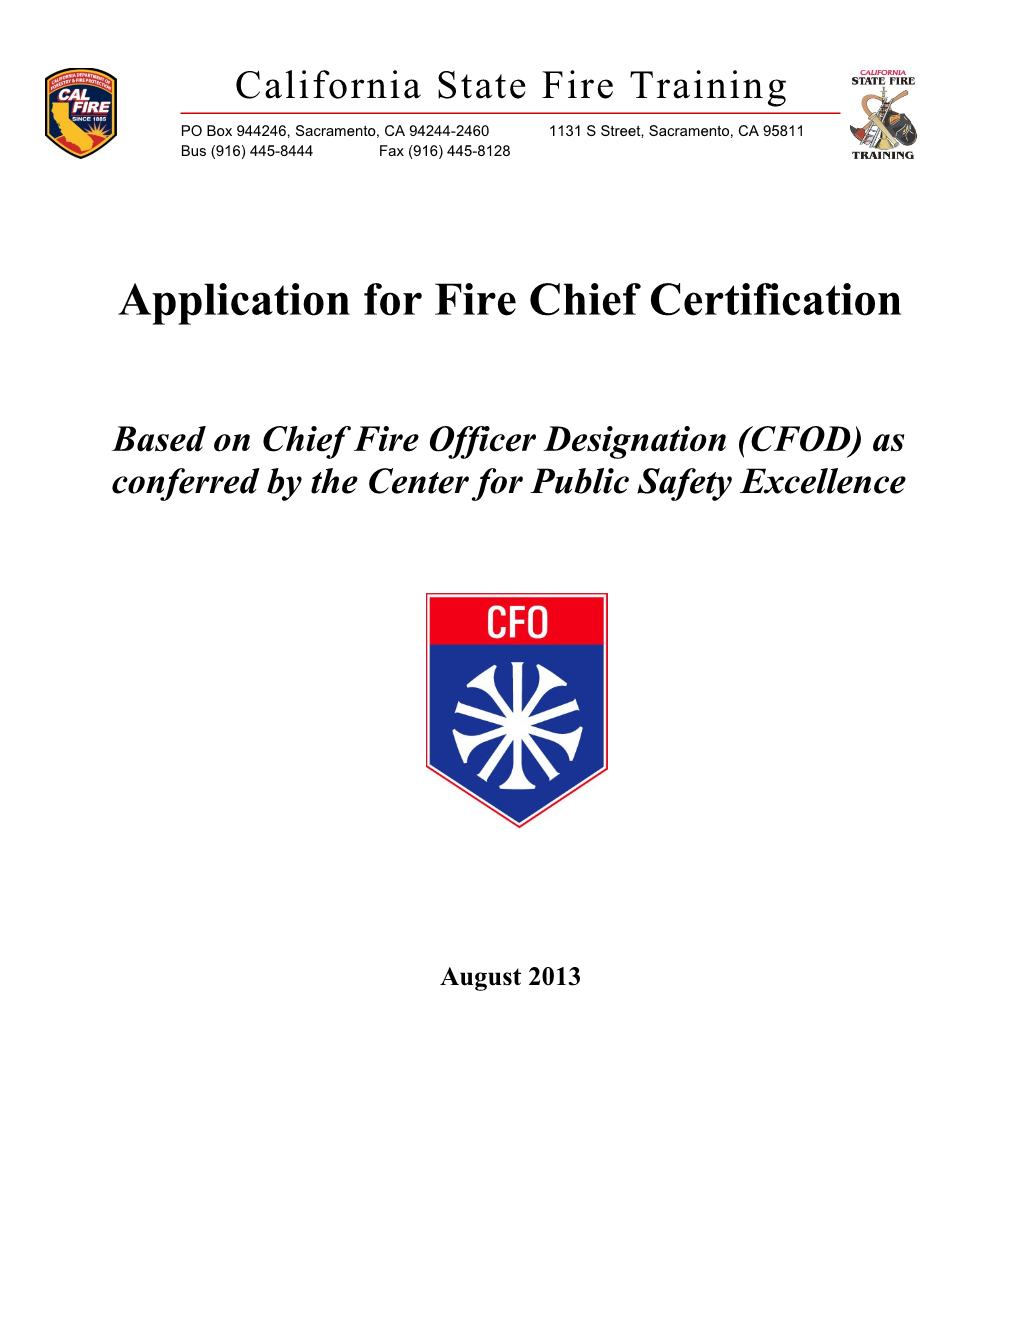 Application for Fire Chief Certification